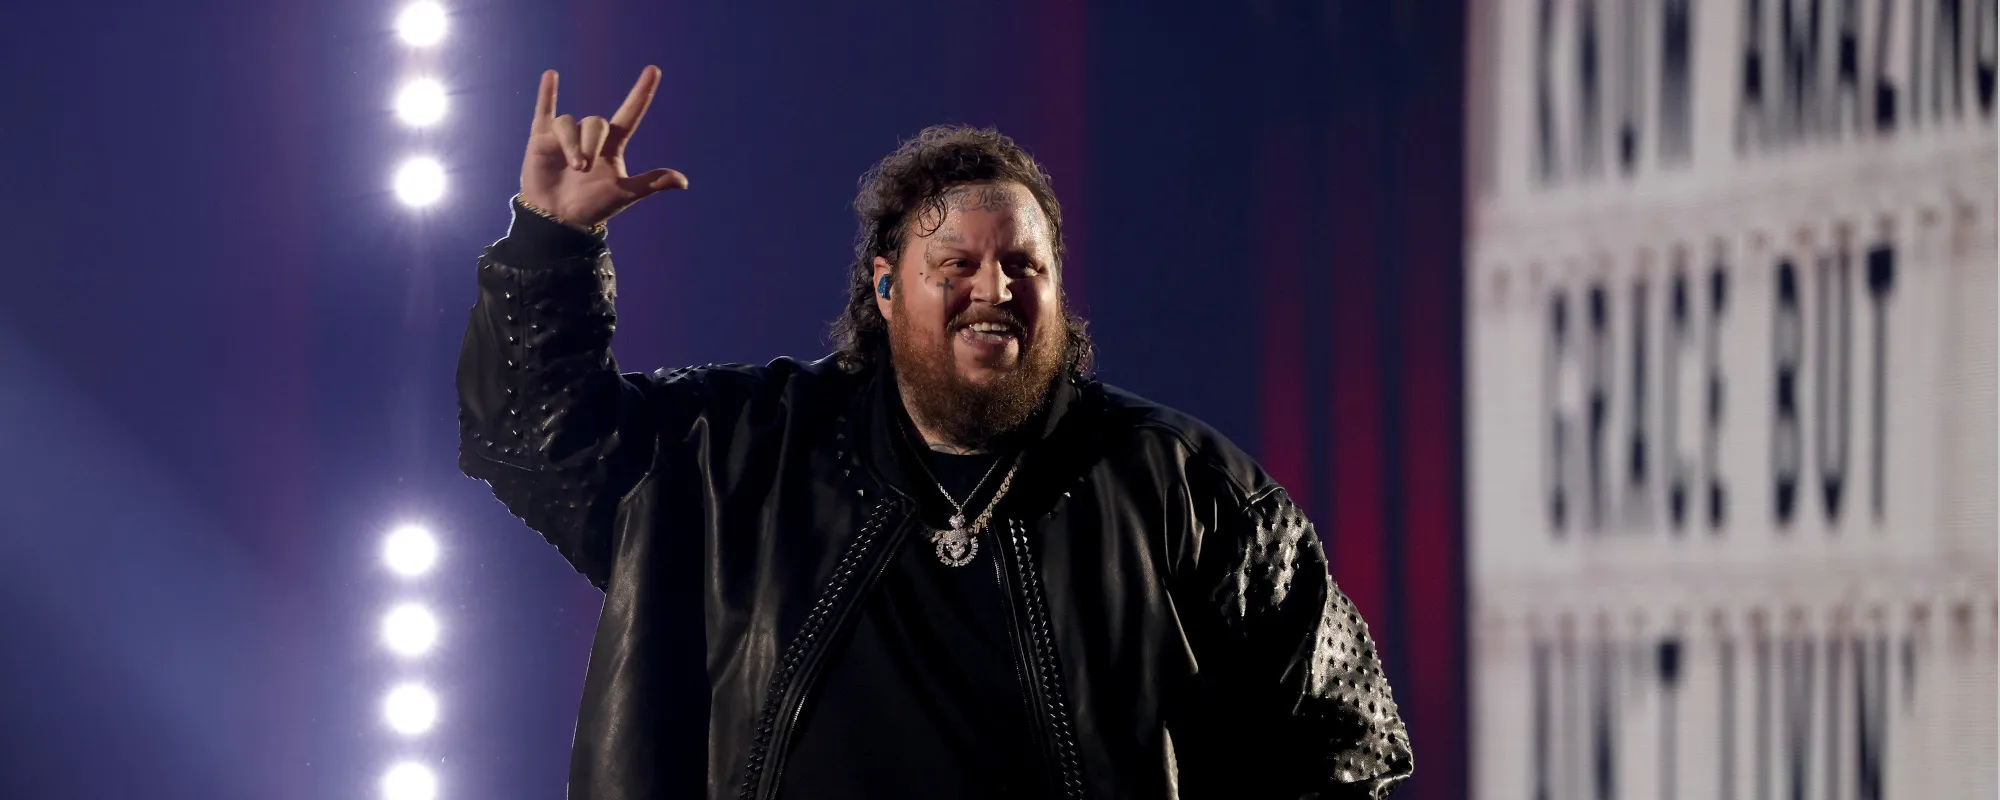 Jelly Roll Holds Church at CMT Music Awards with “Need A Favor” Performance